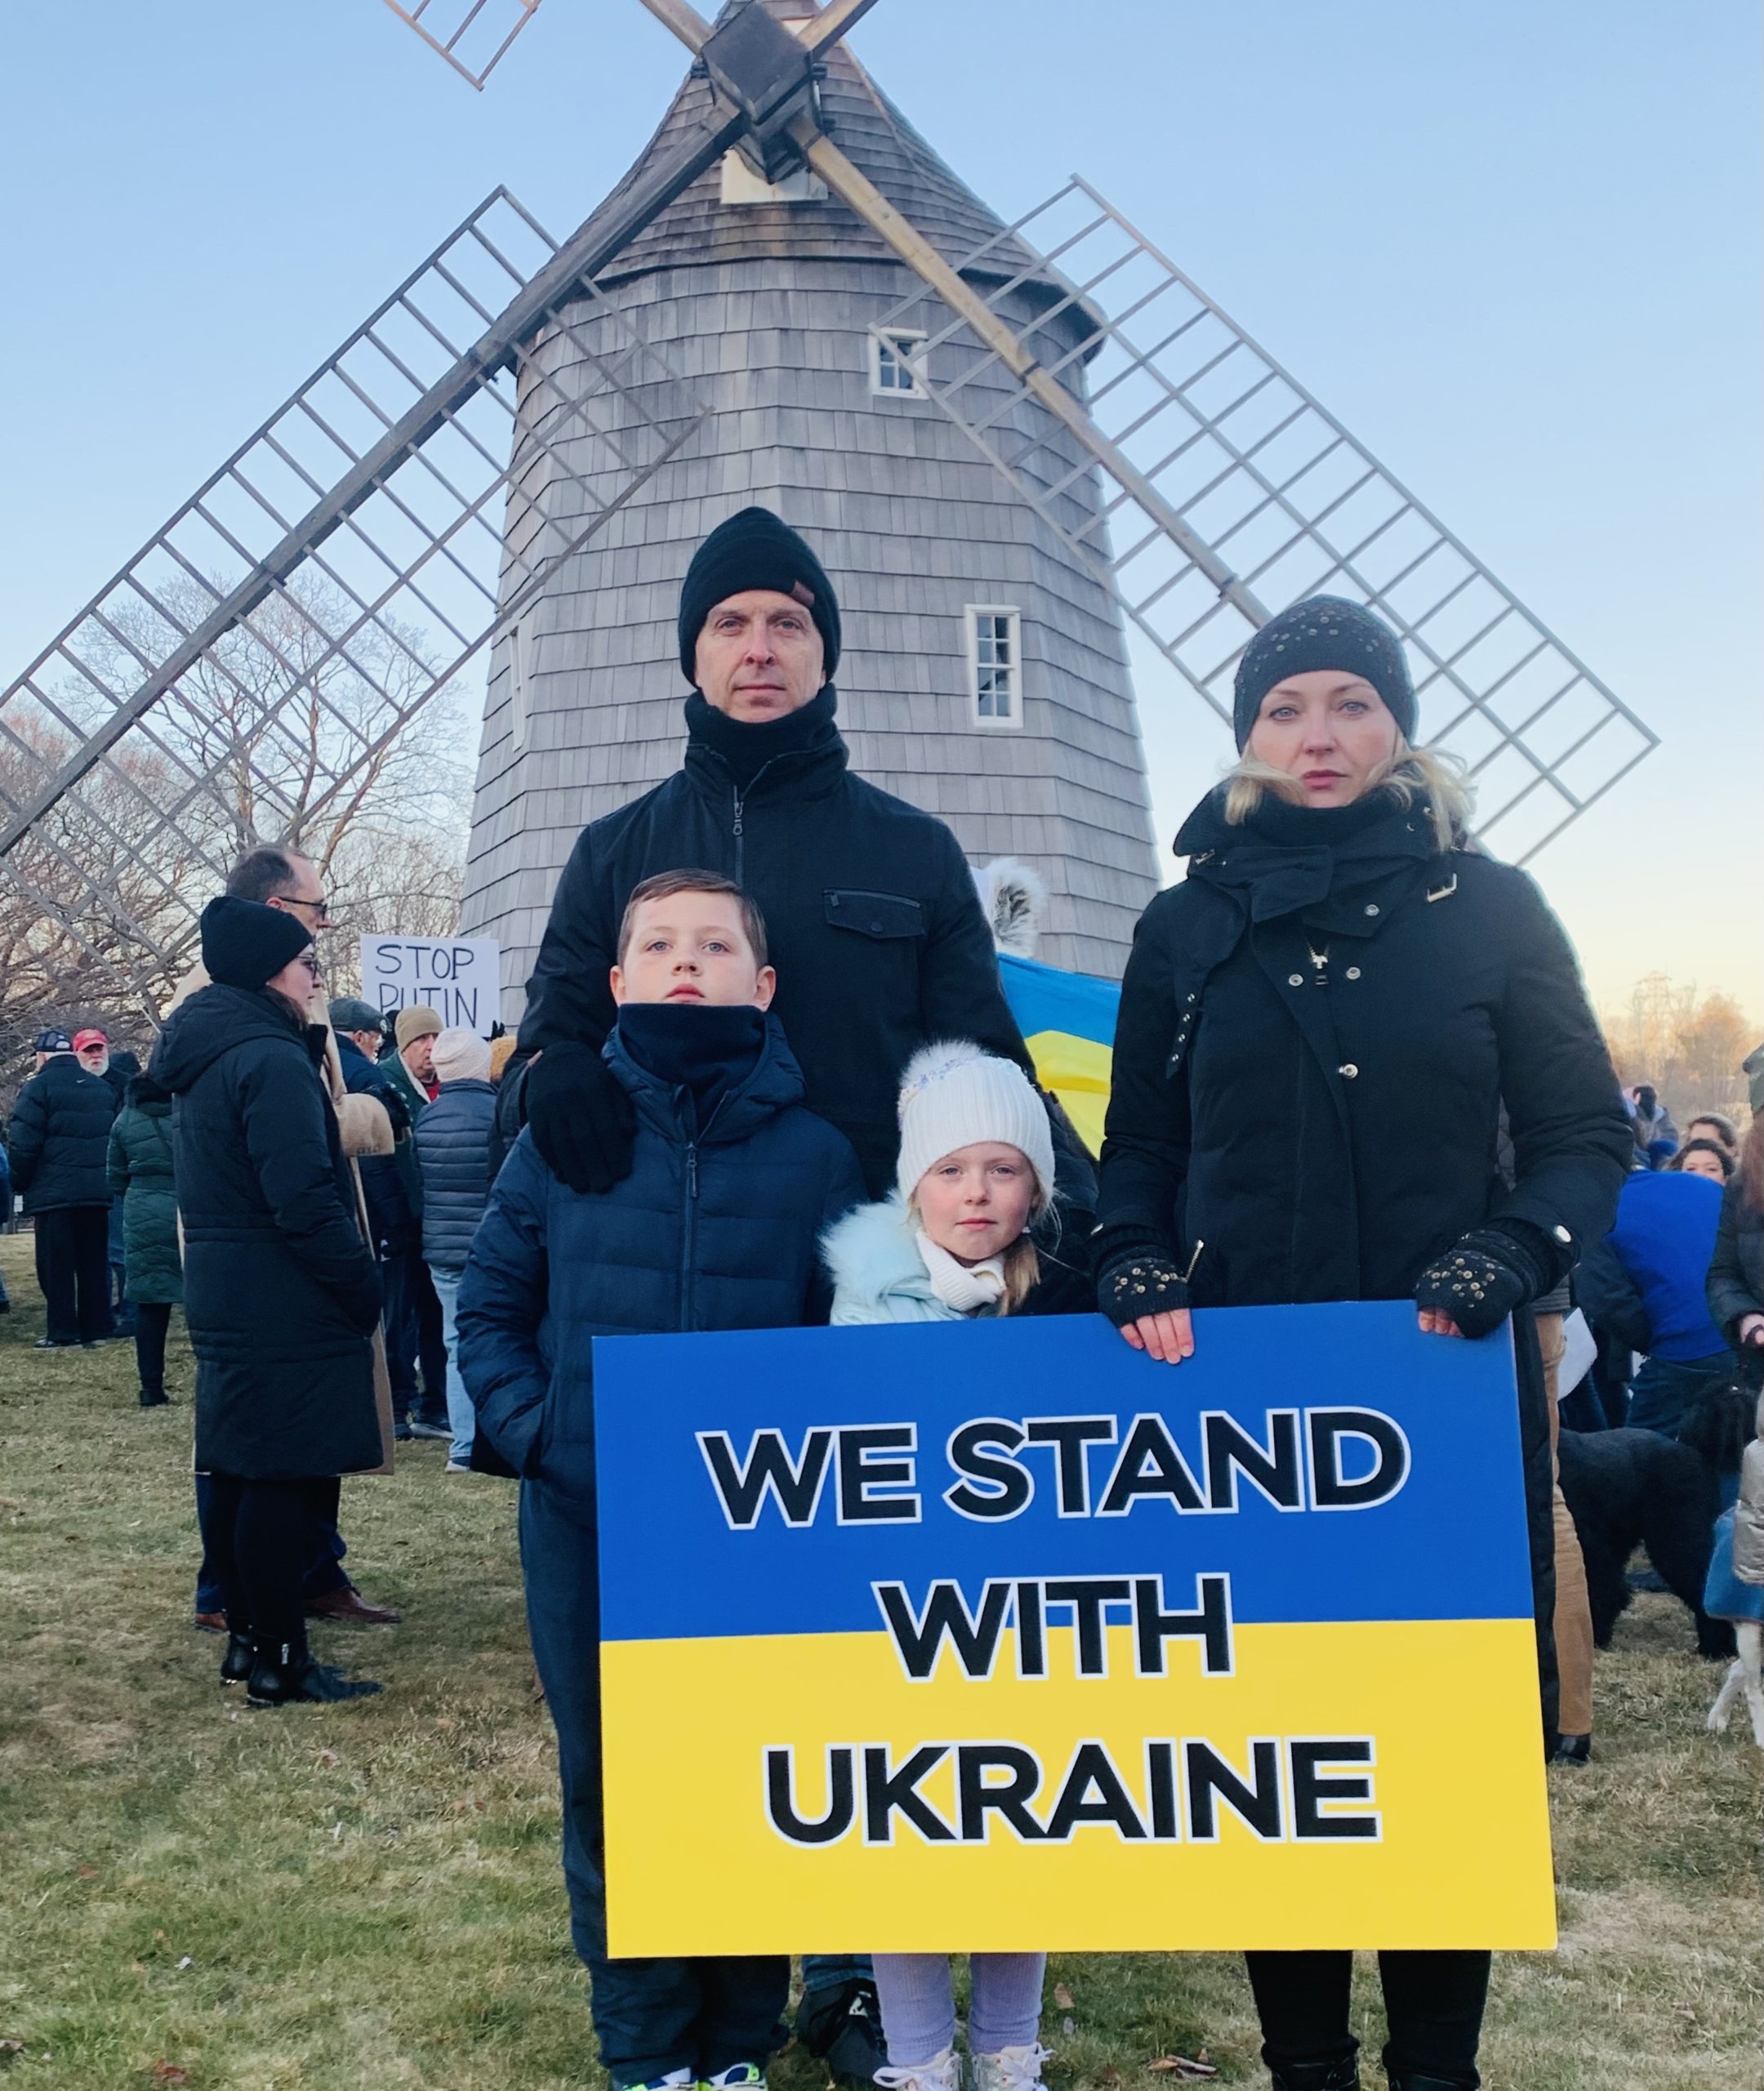 Natalie Massa, right, with her husband, James, and their children, Zayden and Violet, at a rally in support of Ukraine last Thursday in East Hampton.